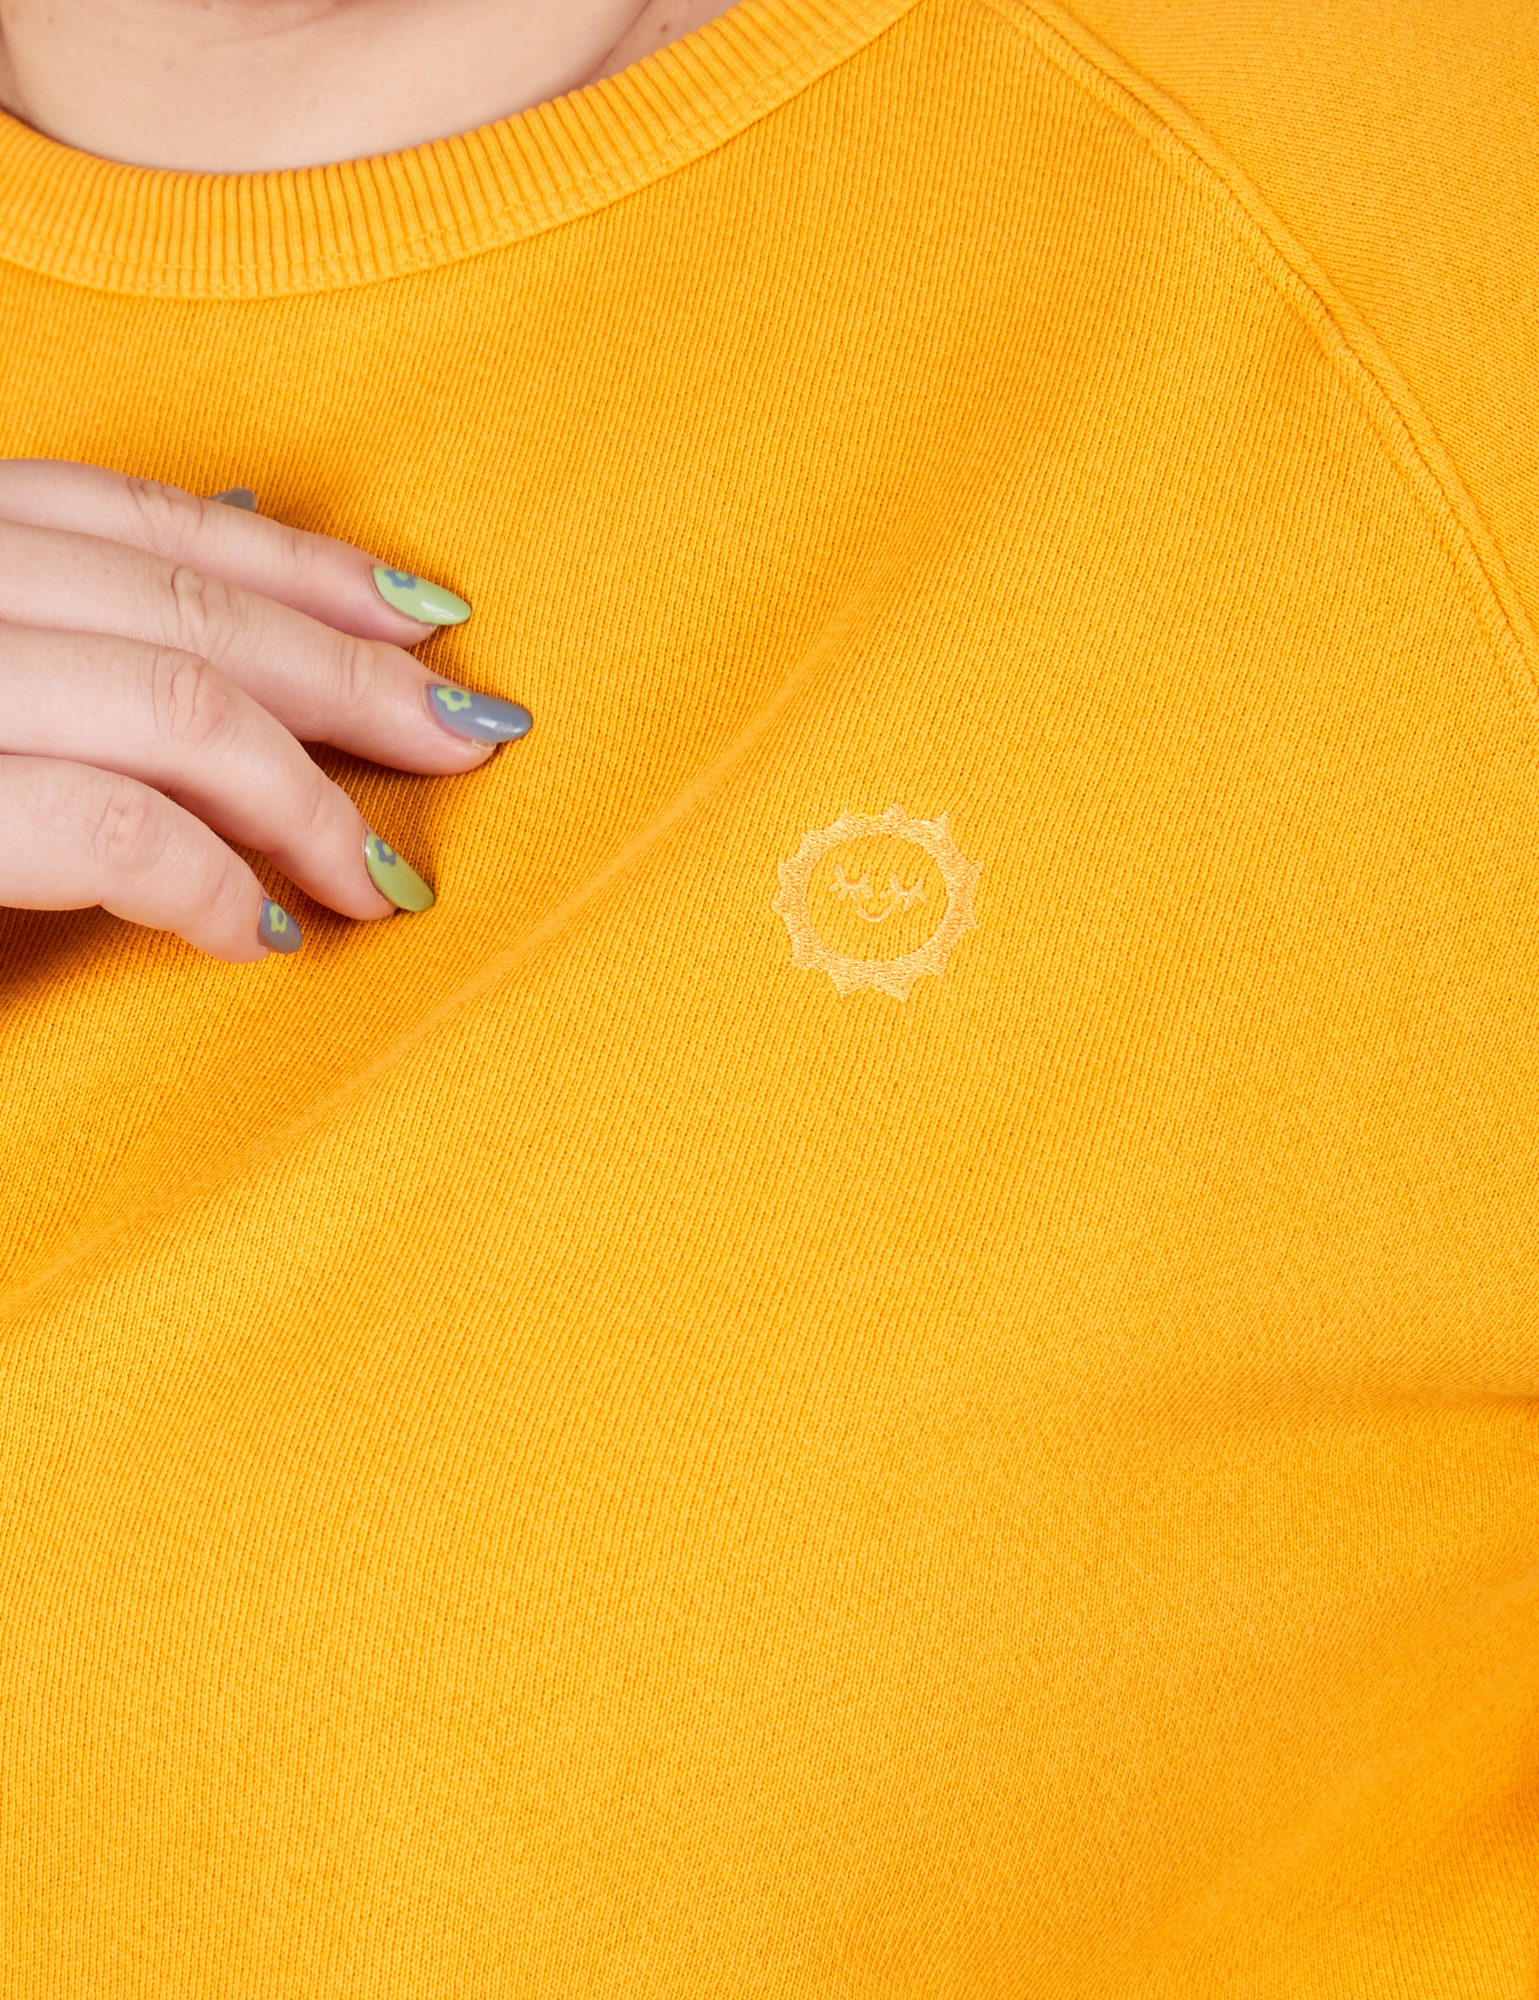 Heavyweight Crew in Mustard Yellow front close up on Ashley. Embroidered Sun Baby logo.